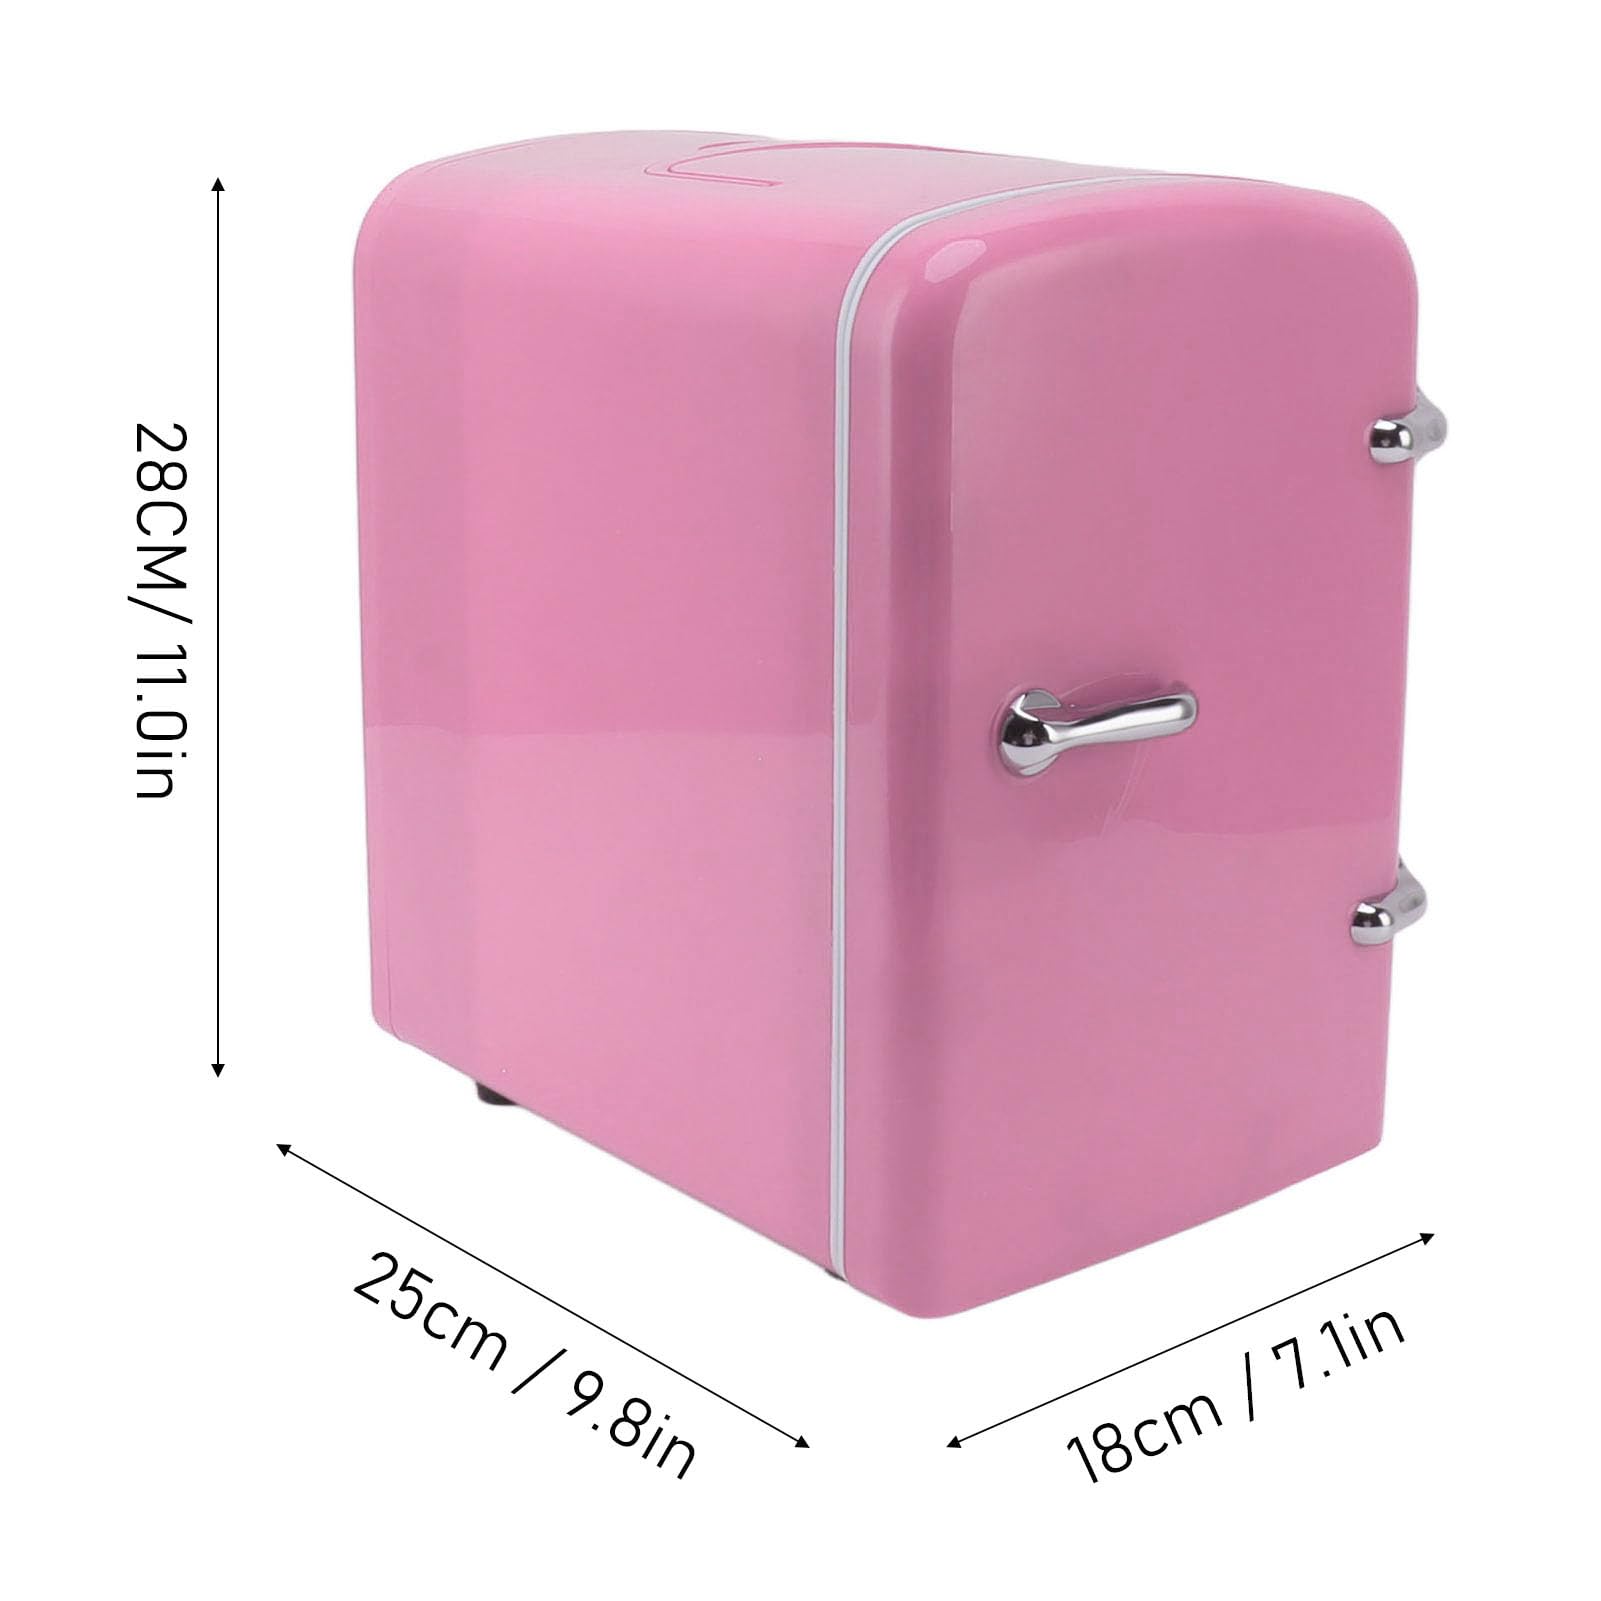 Asixxsix Mini Fridge, 4L Portable Cooler and Warmer Personal Makeup Refrigerator with DC12V Car Plug for Food Skincare Cosmetic Beverage, Beauty Fridge for Bedroom, Office, Car, Dorm (Pink US Plug)